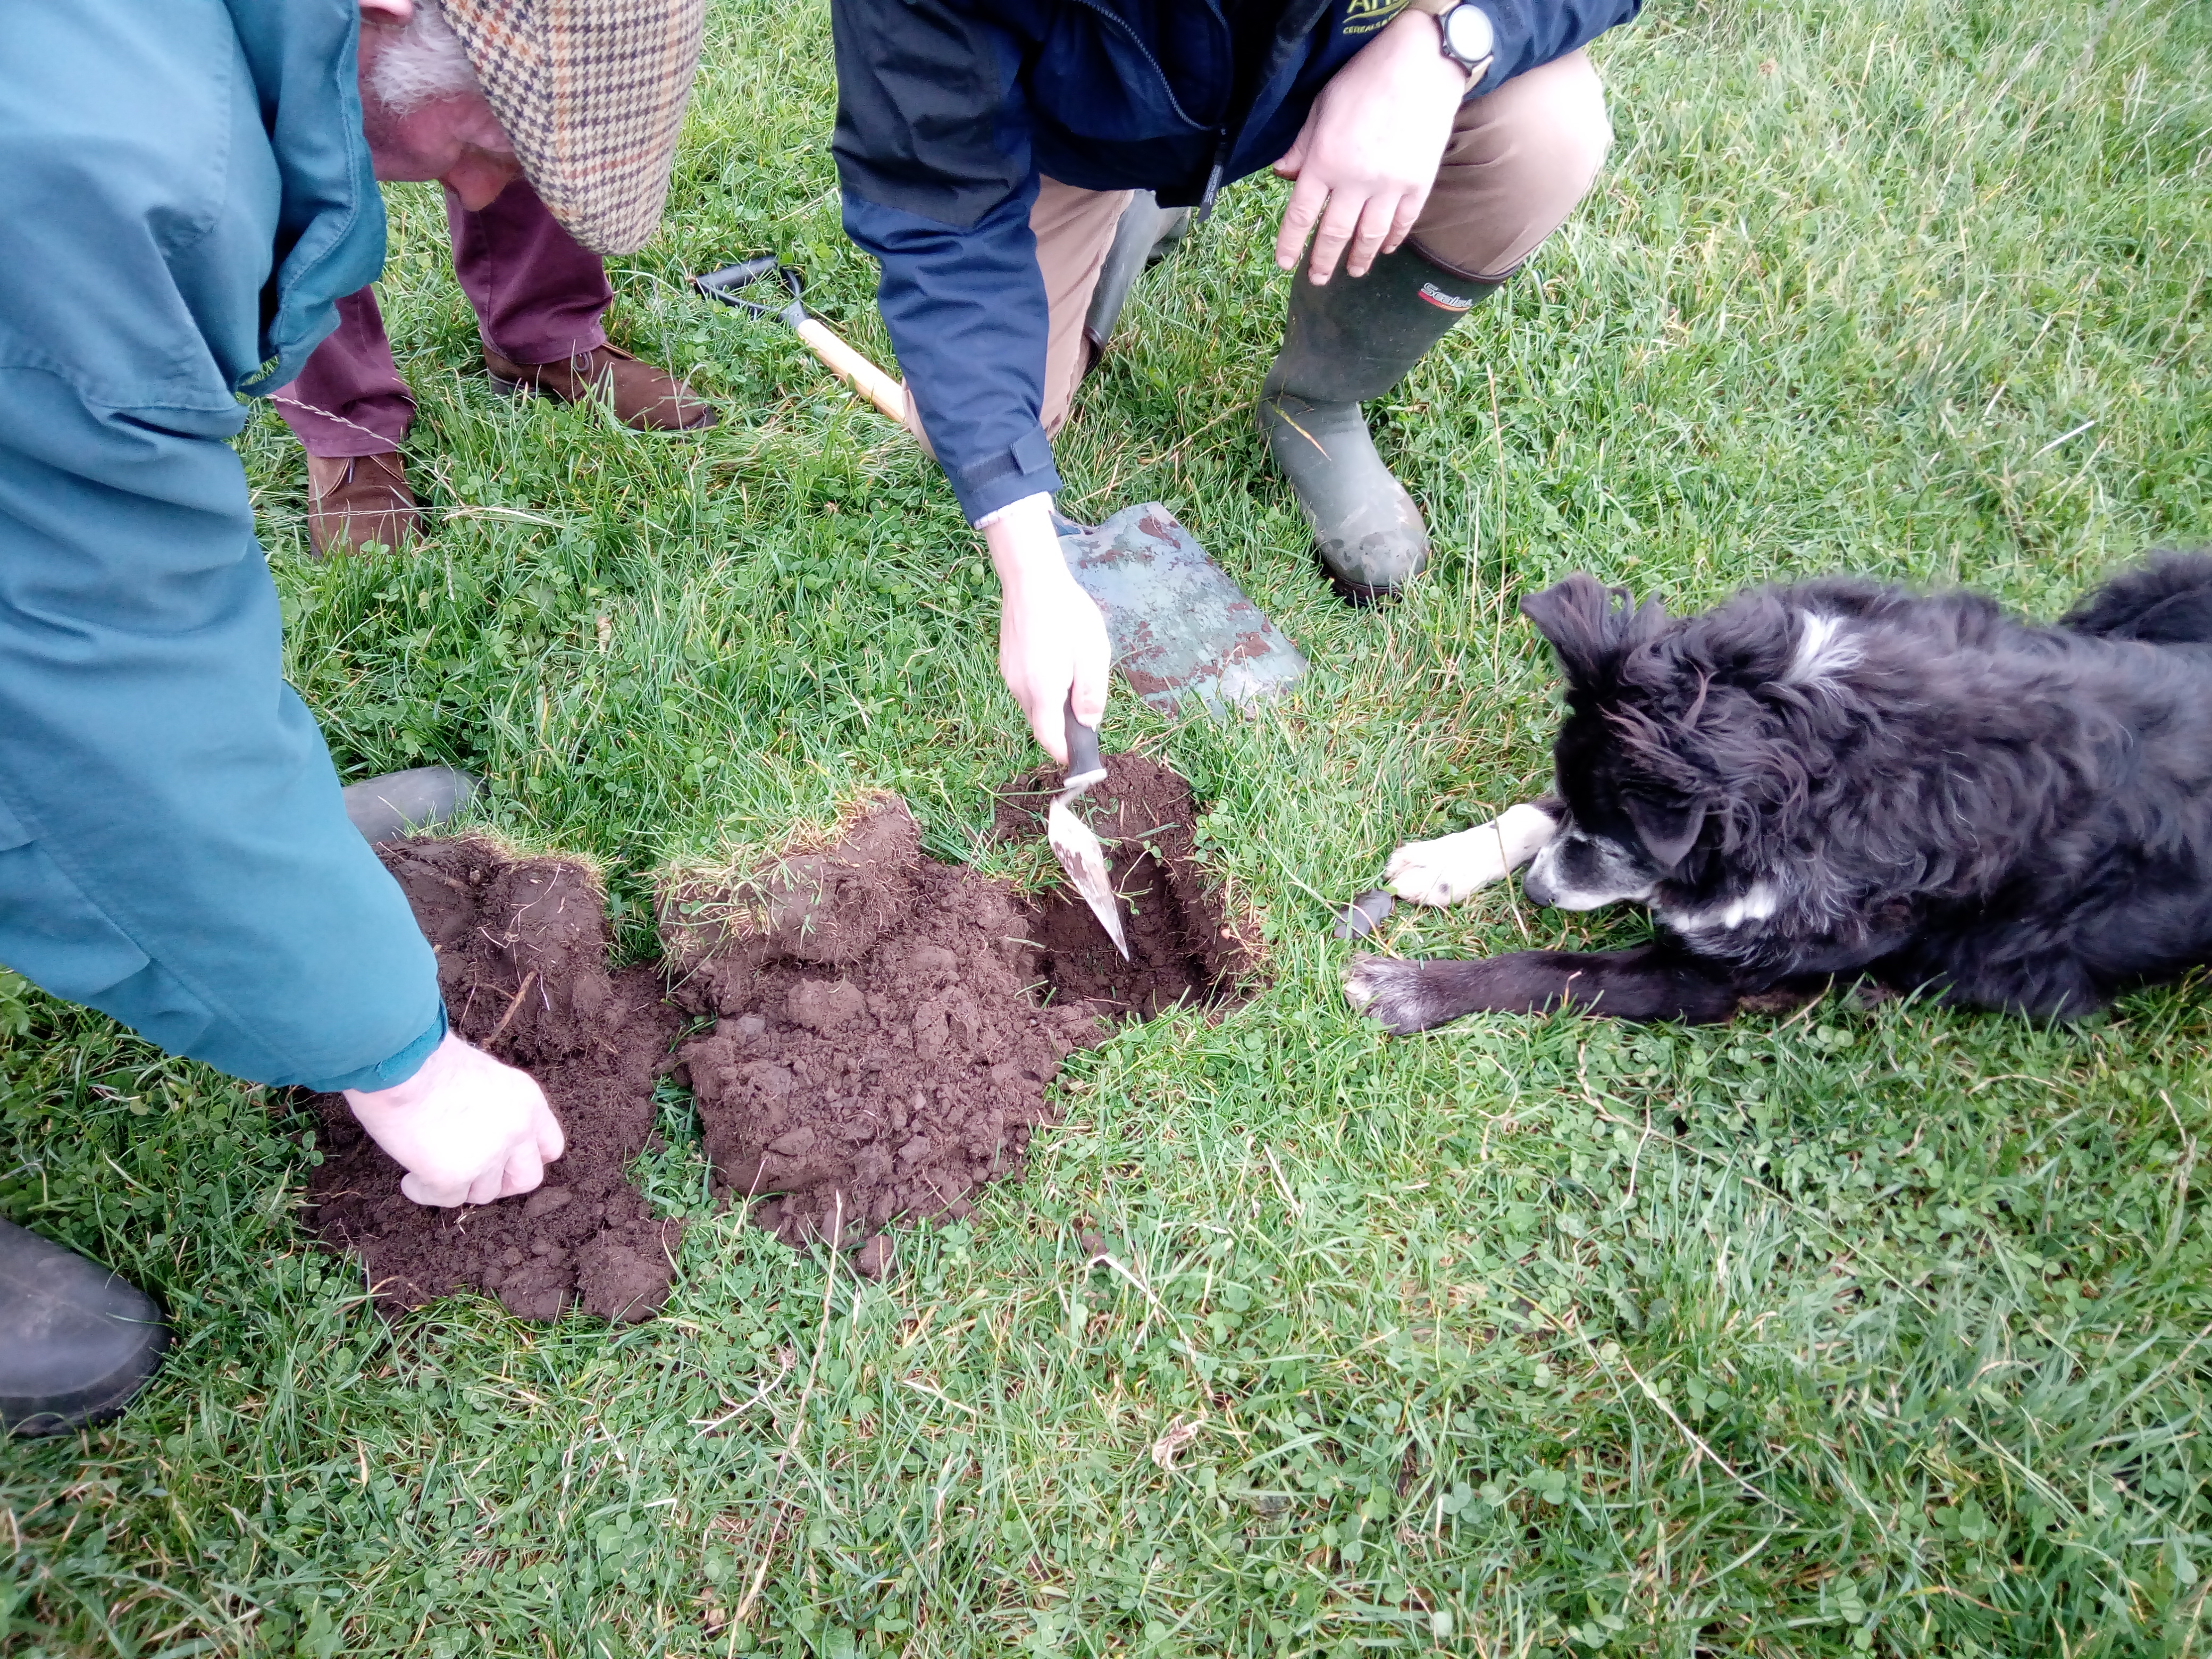 Two men digging a small hole for a soil assessment, in a grass/clover field. There is a black dog lying nearby watching them closely!